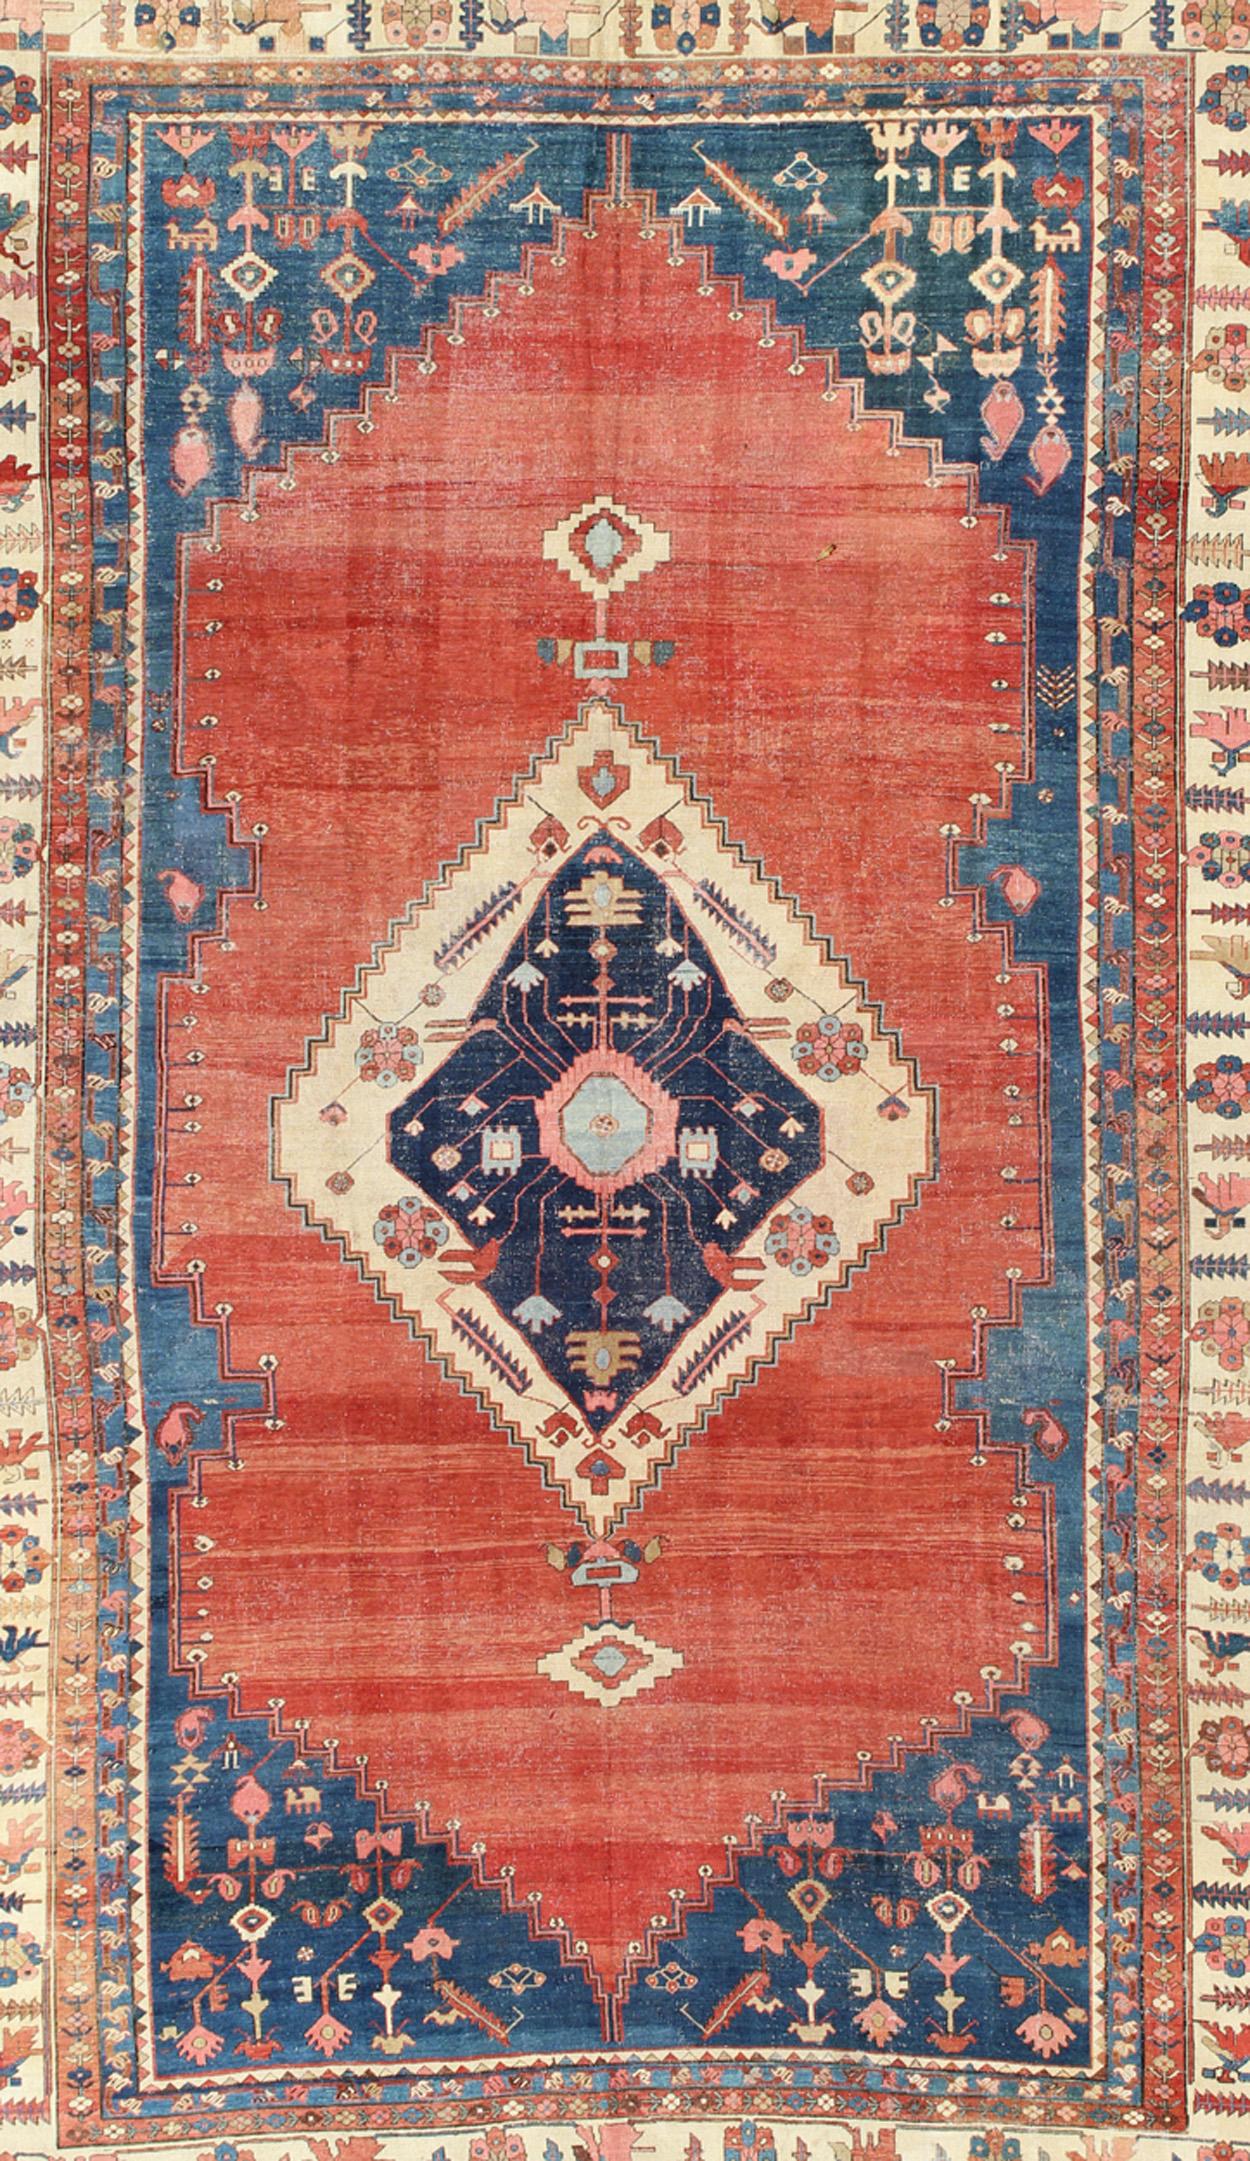 Bakshaish Finely Woven 19th Century Antique Persian Bakhshaiesh Rug in Rust Red and Blue For Sale